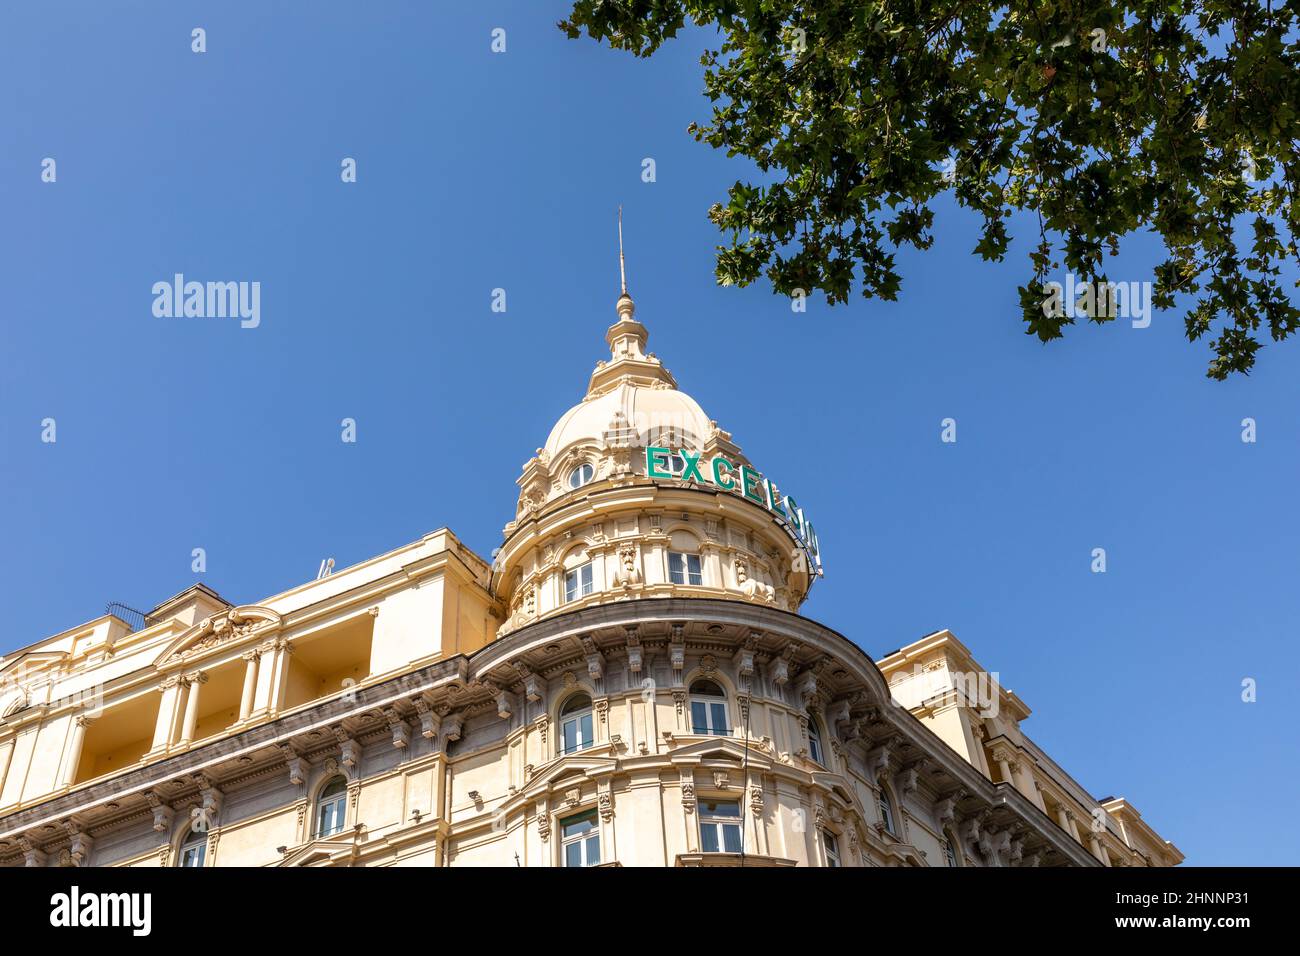 facade of historic luxury hotel Excelsior in Rome, Italy Stock Photo